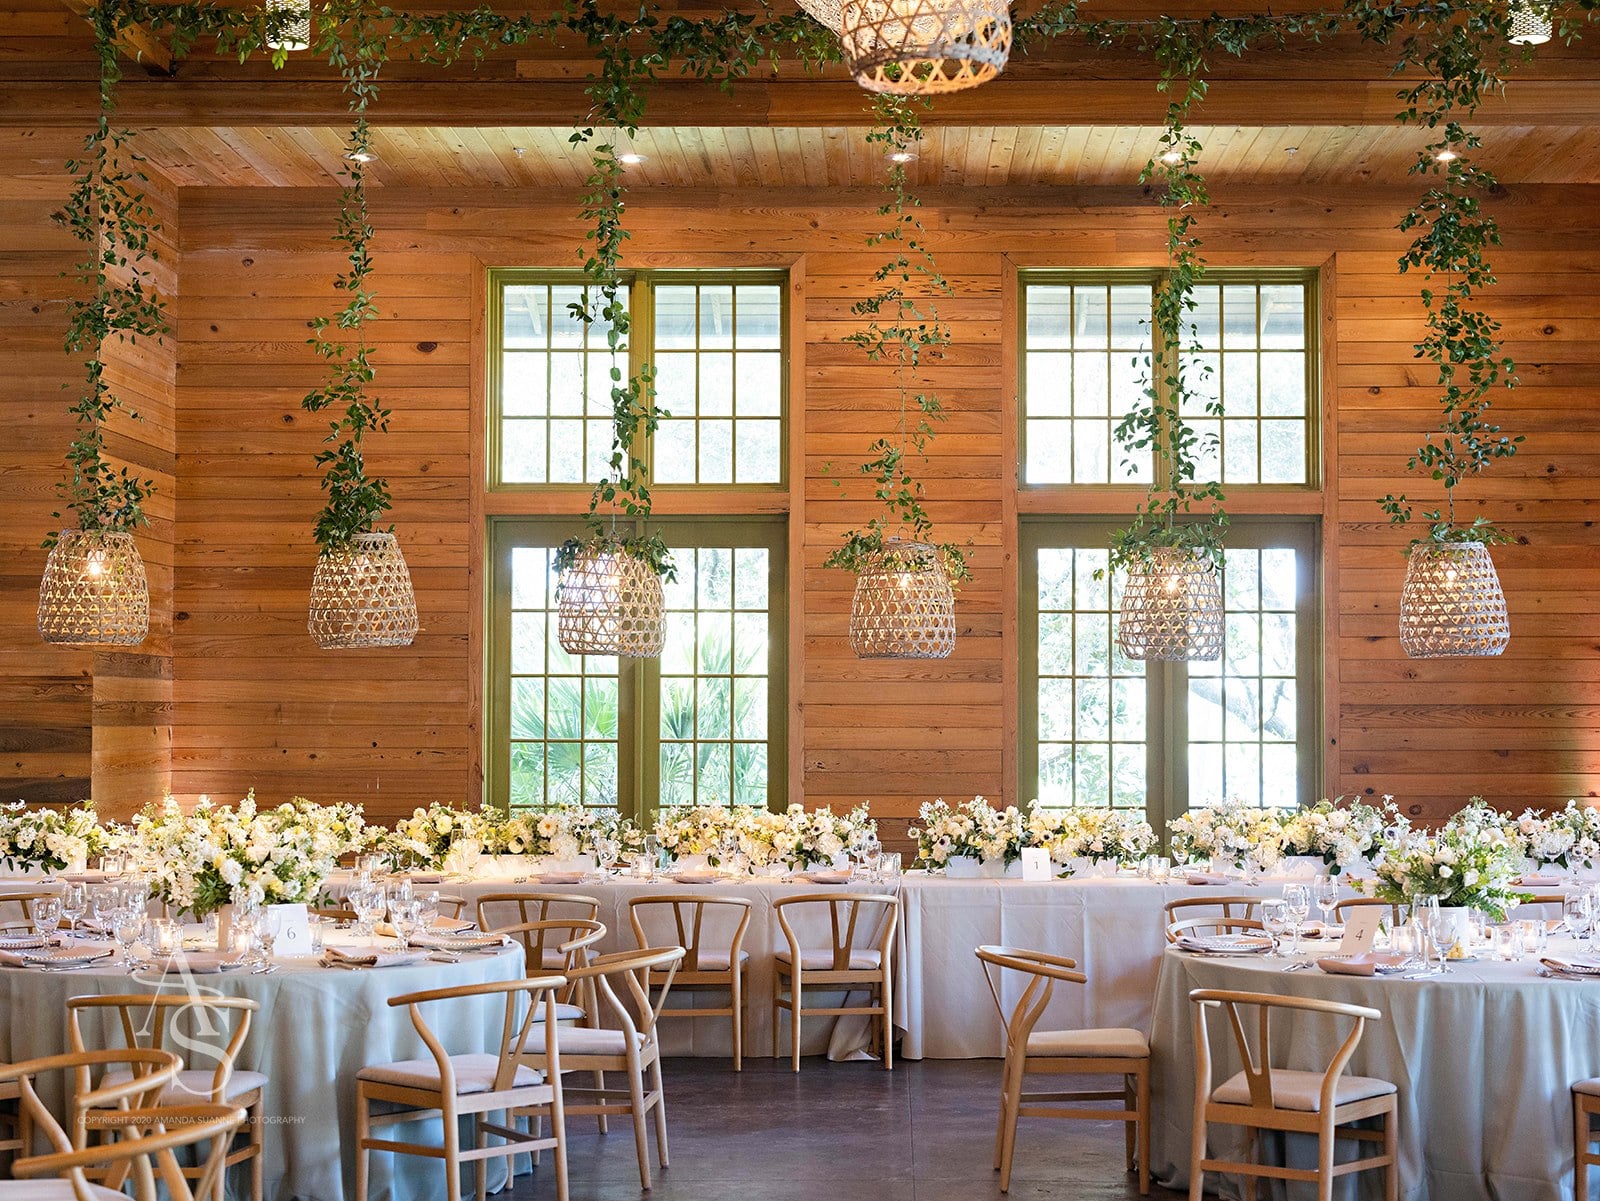 Wedding reception with white tables and wood chairs